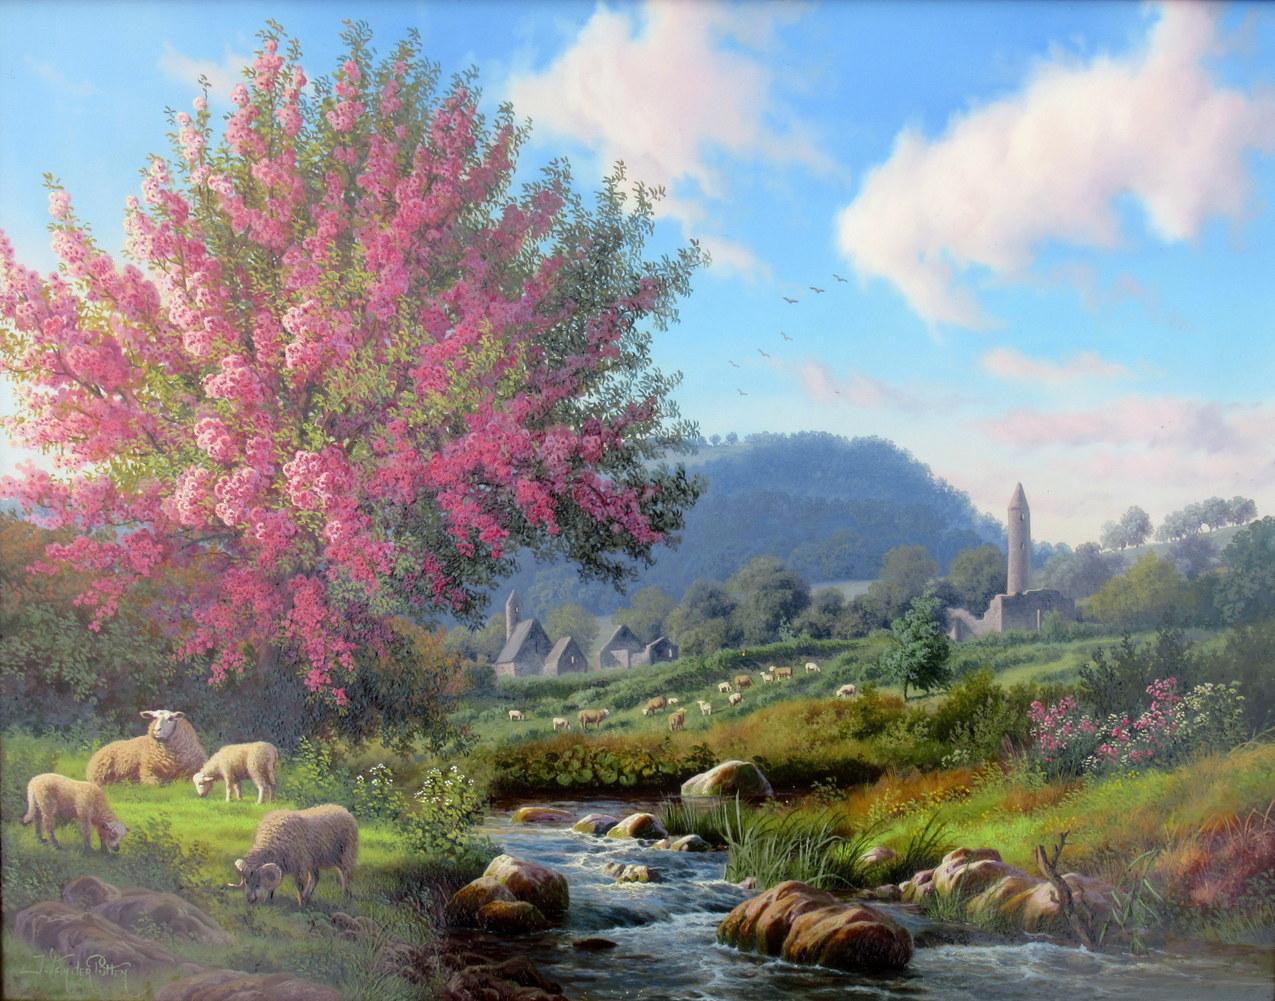 Superb Painting by Daniel Van der Putten, a view of one of Ireland’s most scenic locations Wicklow mountains in County Wicklow just outside of Dublin. This vintage view depicts a stream with sheep grazing to the left and a Round Tower and a group of